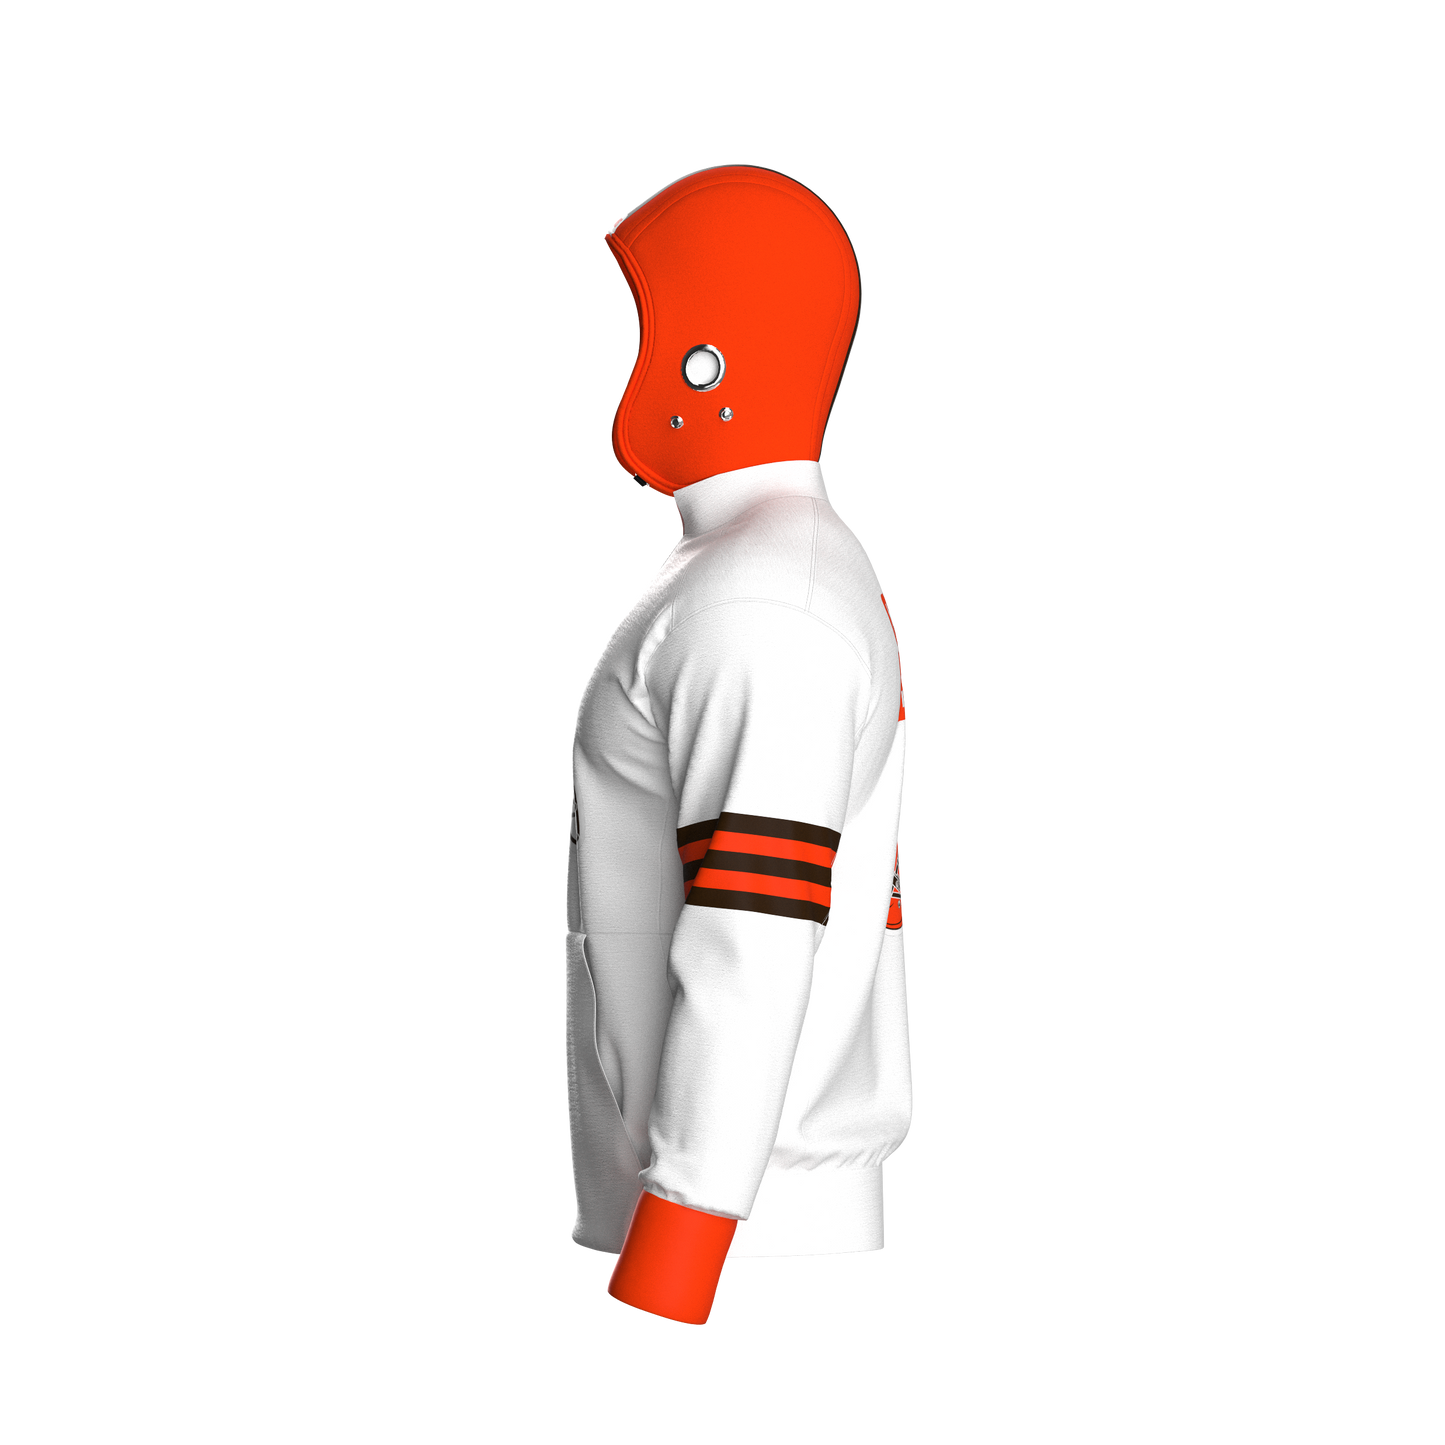 Cleveland Browns Away Pullover (youth)